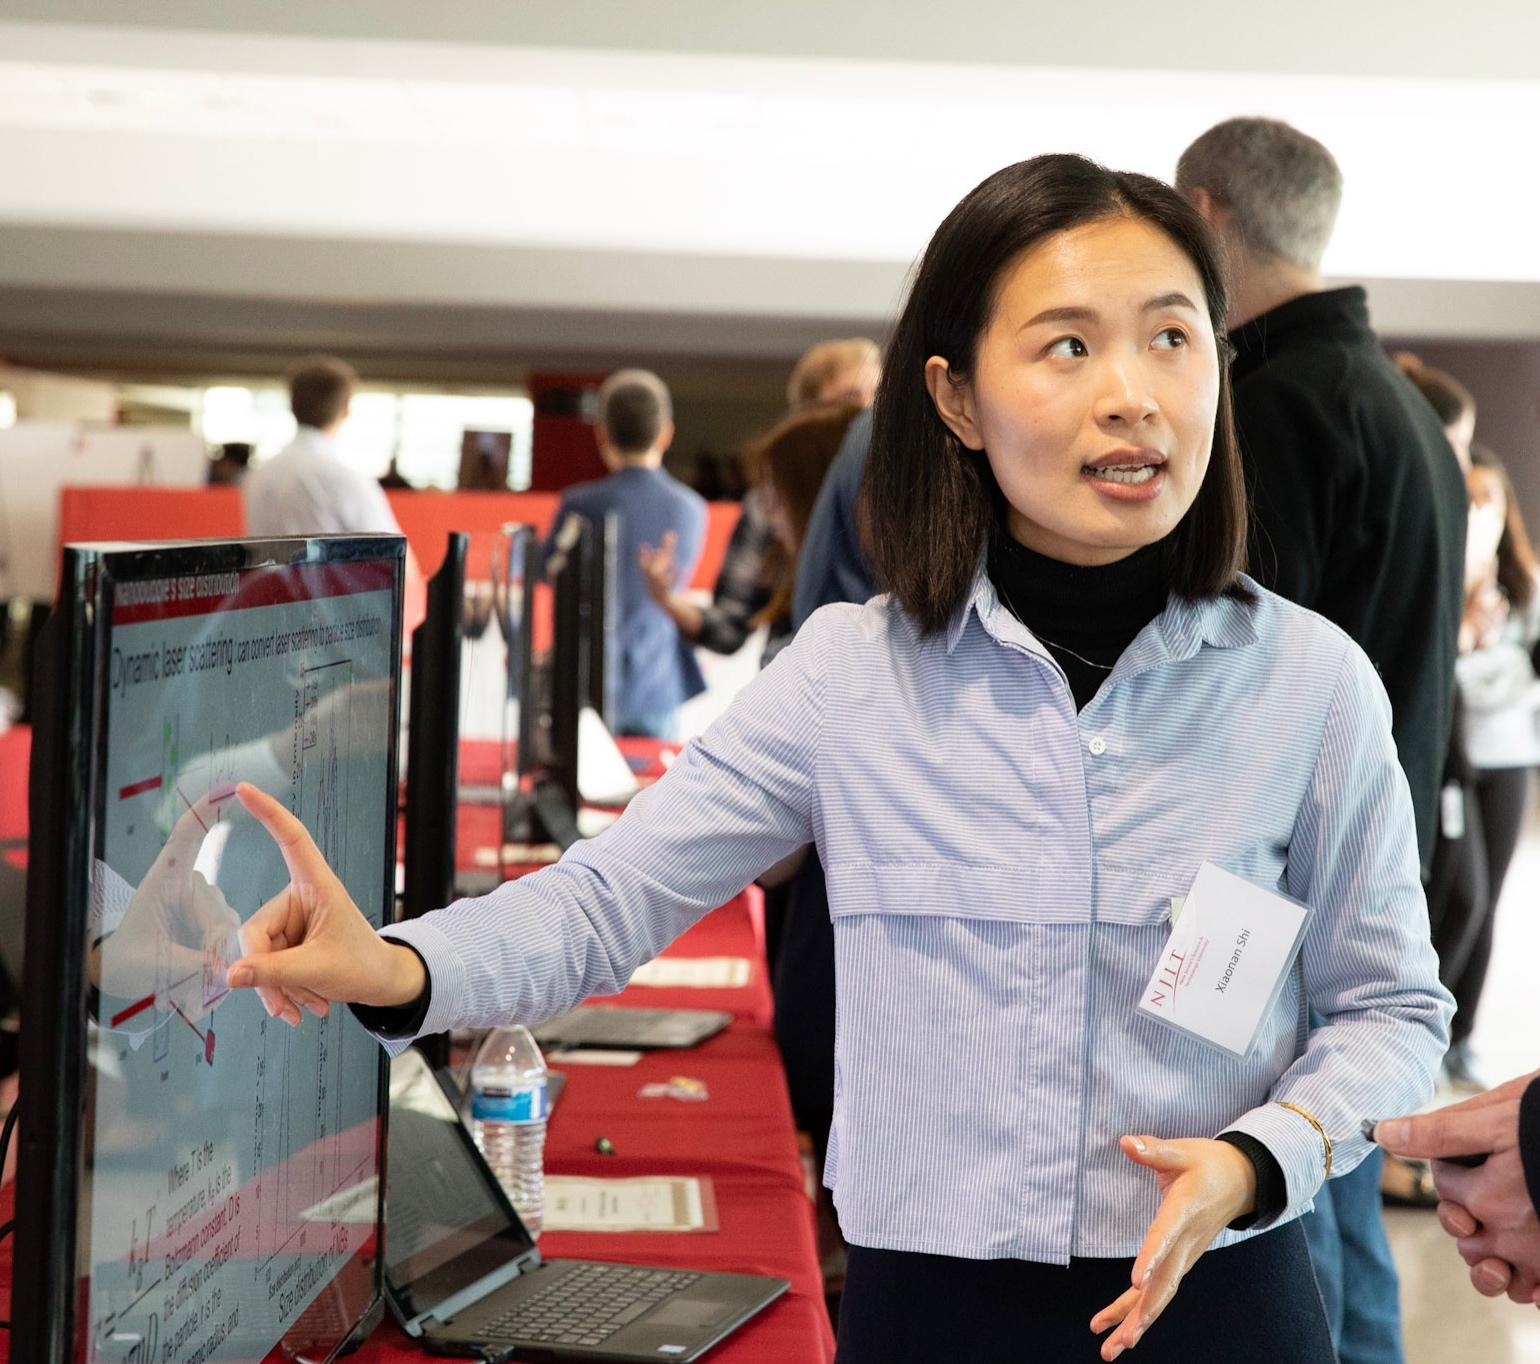 Environmental Engineering Ph.D. student, Xiaonan Shi, describes her recent research involving the use of nanobubbles to improve environmental remediation efforts and enhance agricultural growth.